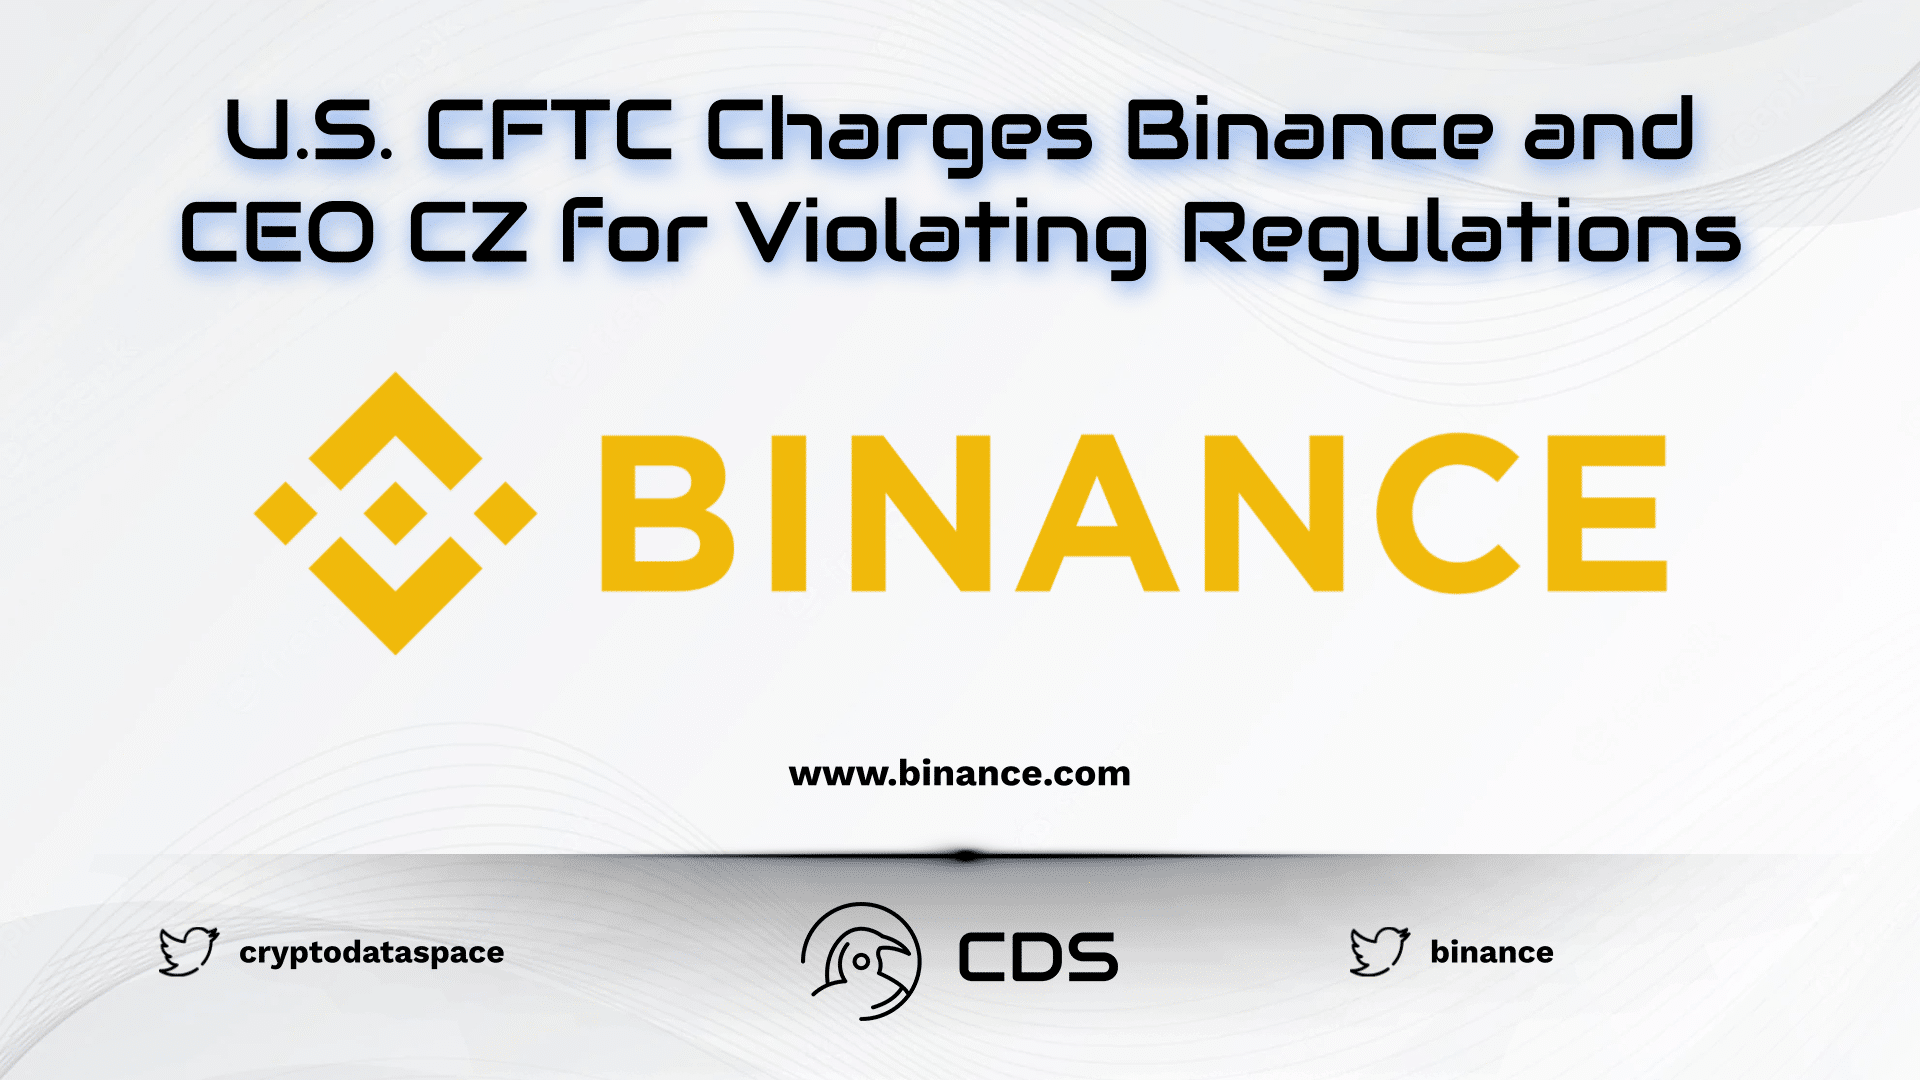 U.S. CFTC Charges Binance and CEO CZ for Violating Regulations